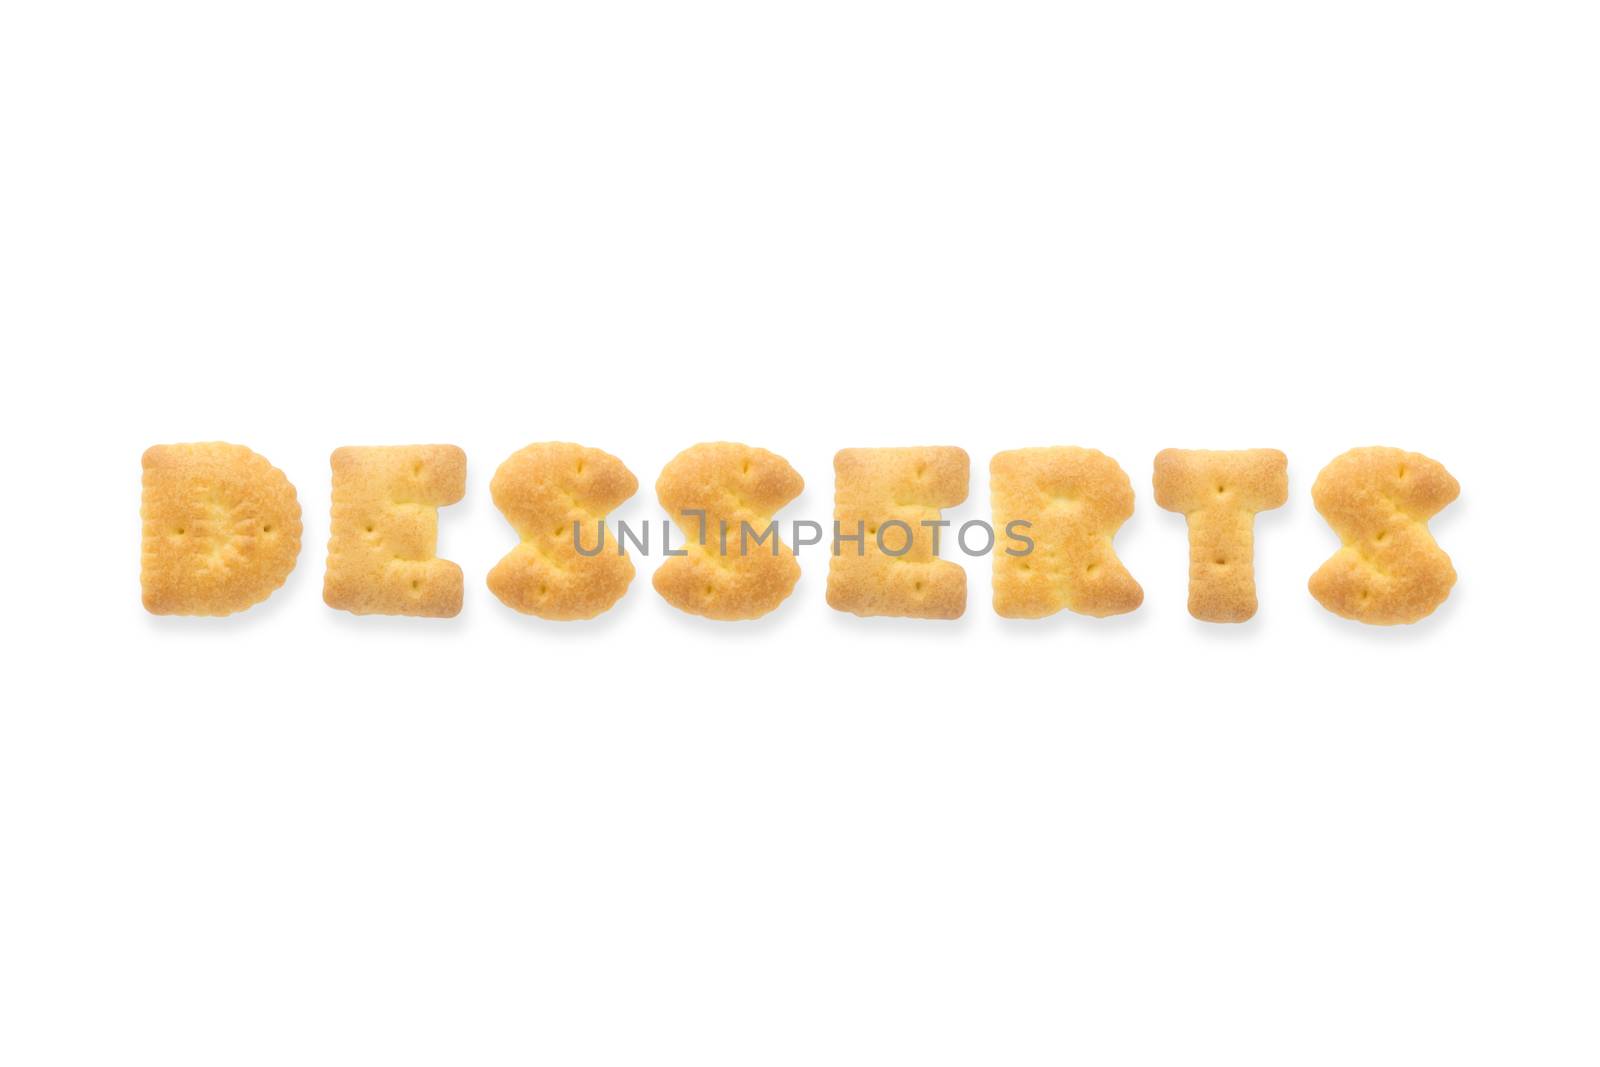 Collage of the capital letter word DESSERTS. Alphabet cookie biscuits isolated on white background